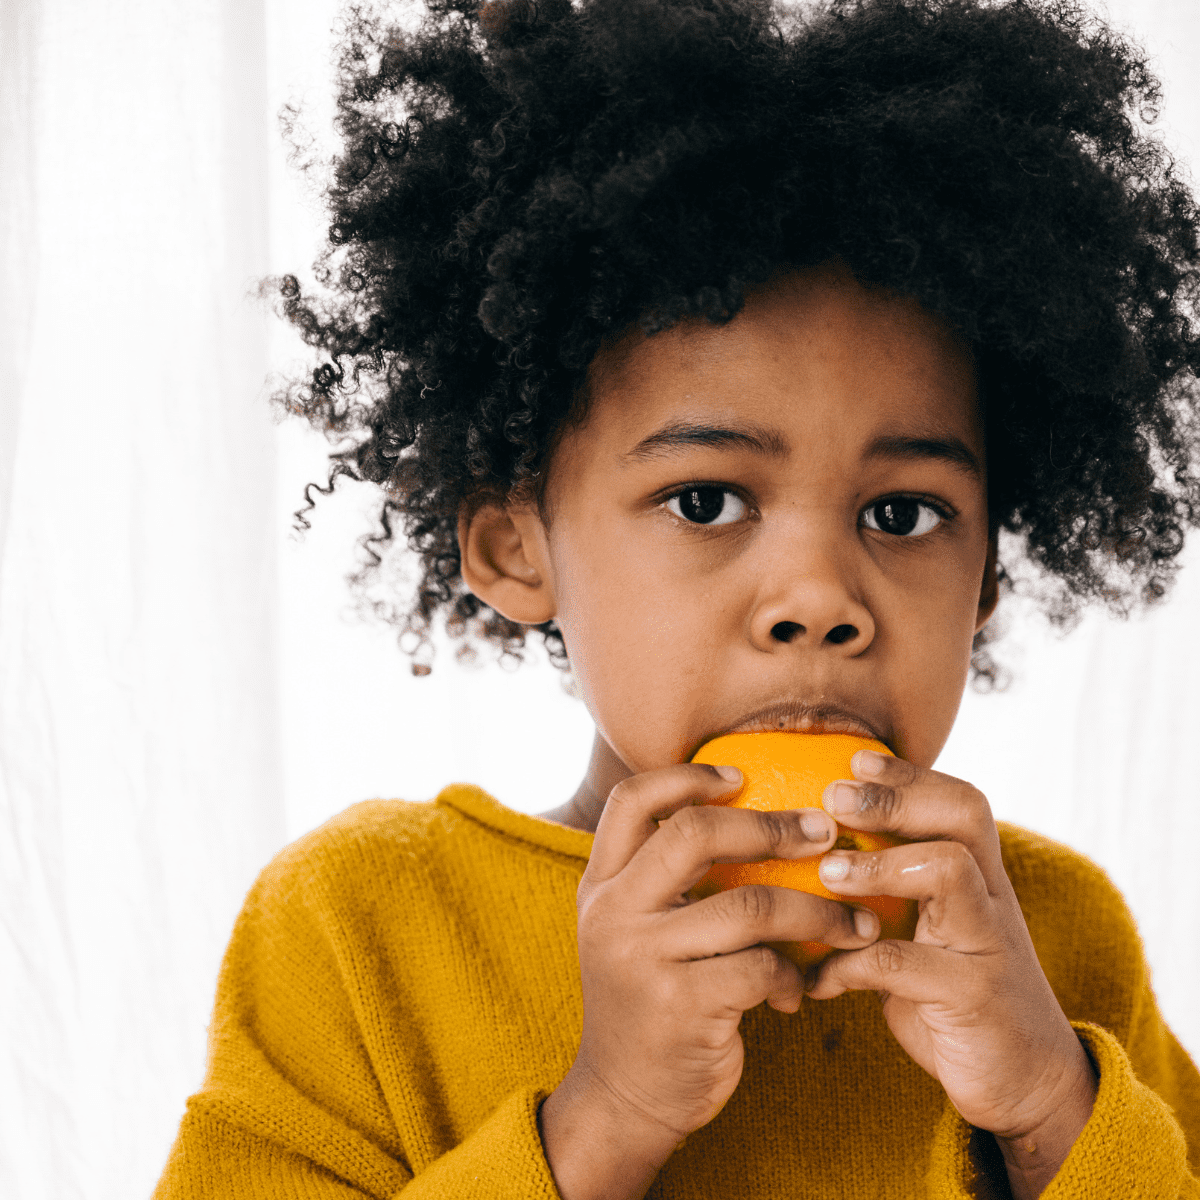 Child in yellow sweater eating an organge half.